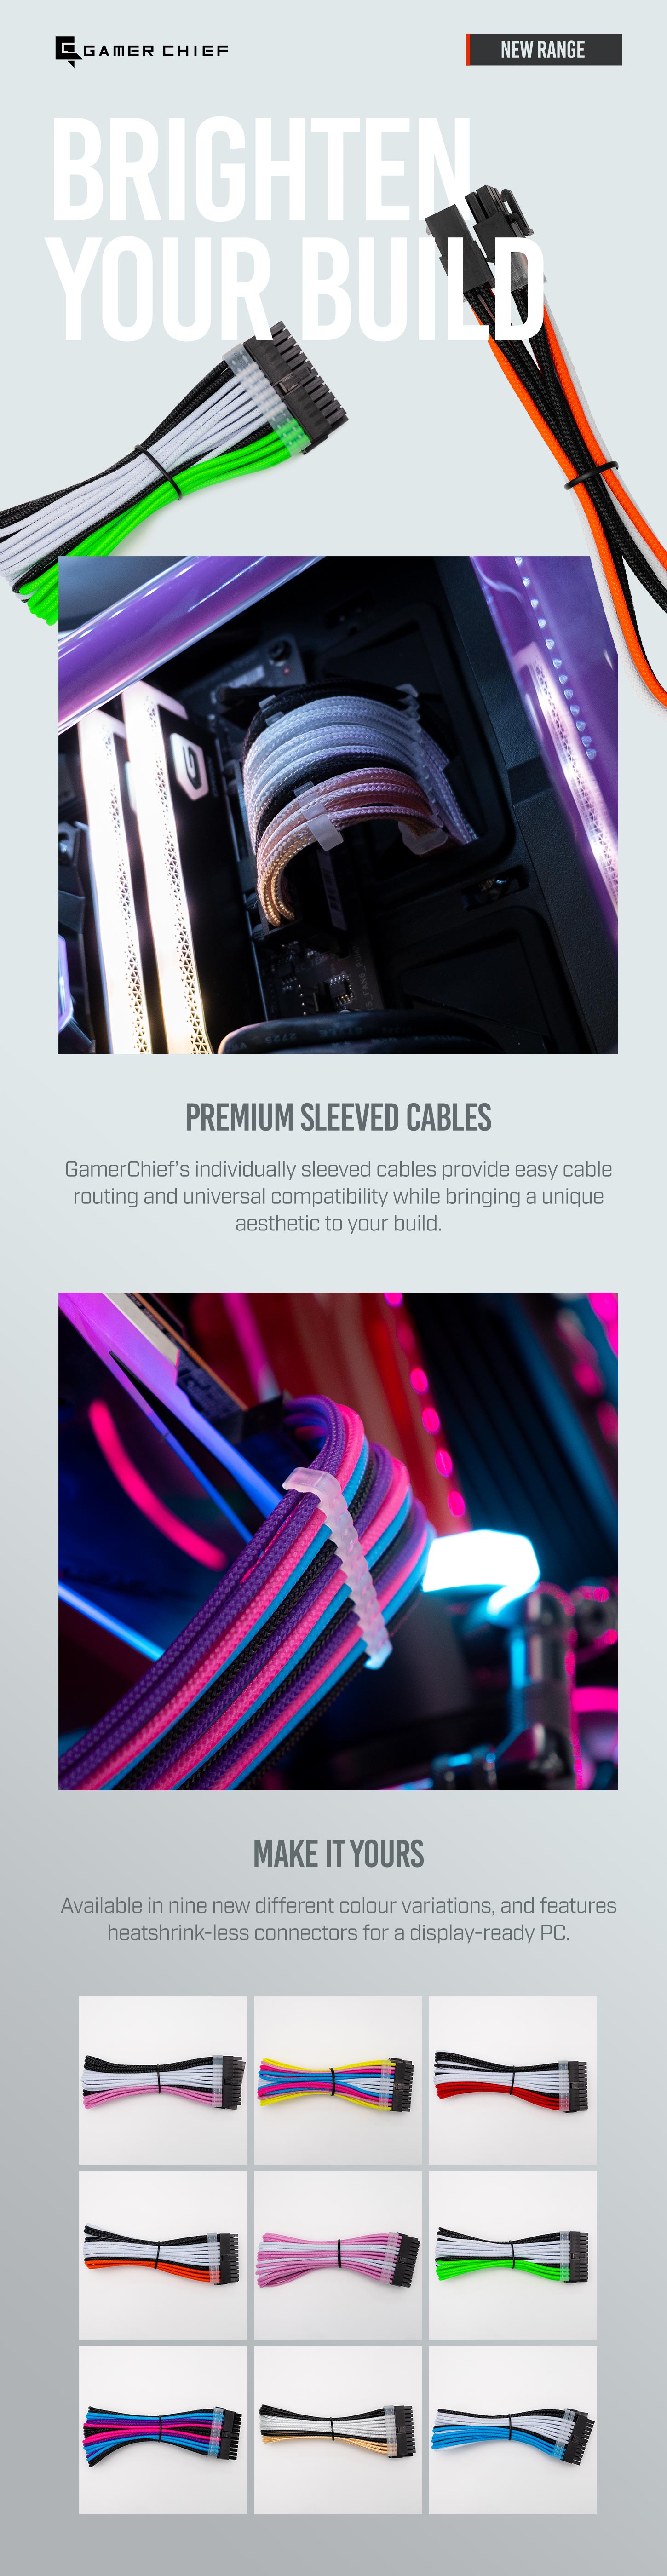 A large marketing image providing additional information about the product GamerChief Elite Series 6-Pin PCIe 30cm Sleeved Extension Cable ( Pink / Blue / White) - Additional alt info not provided